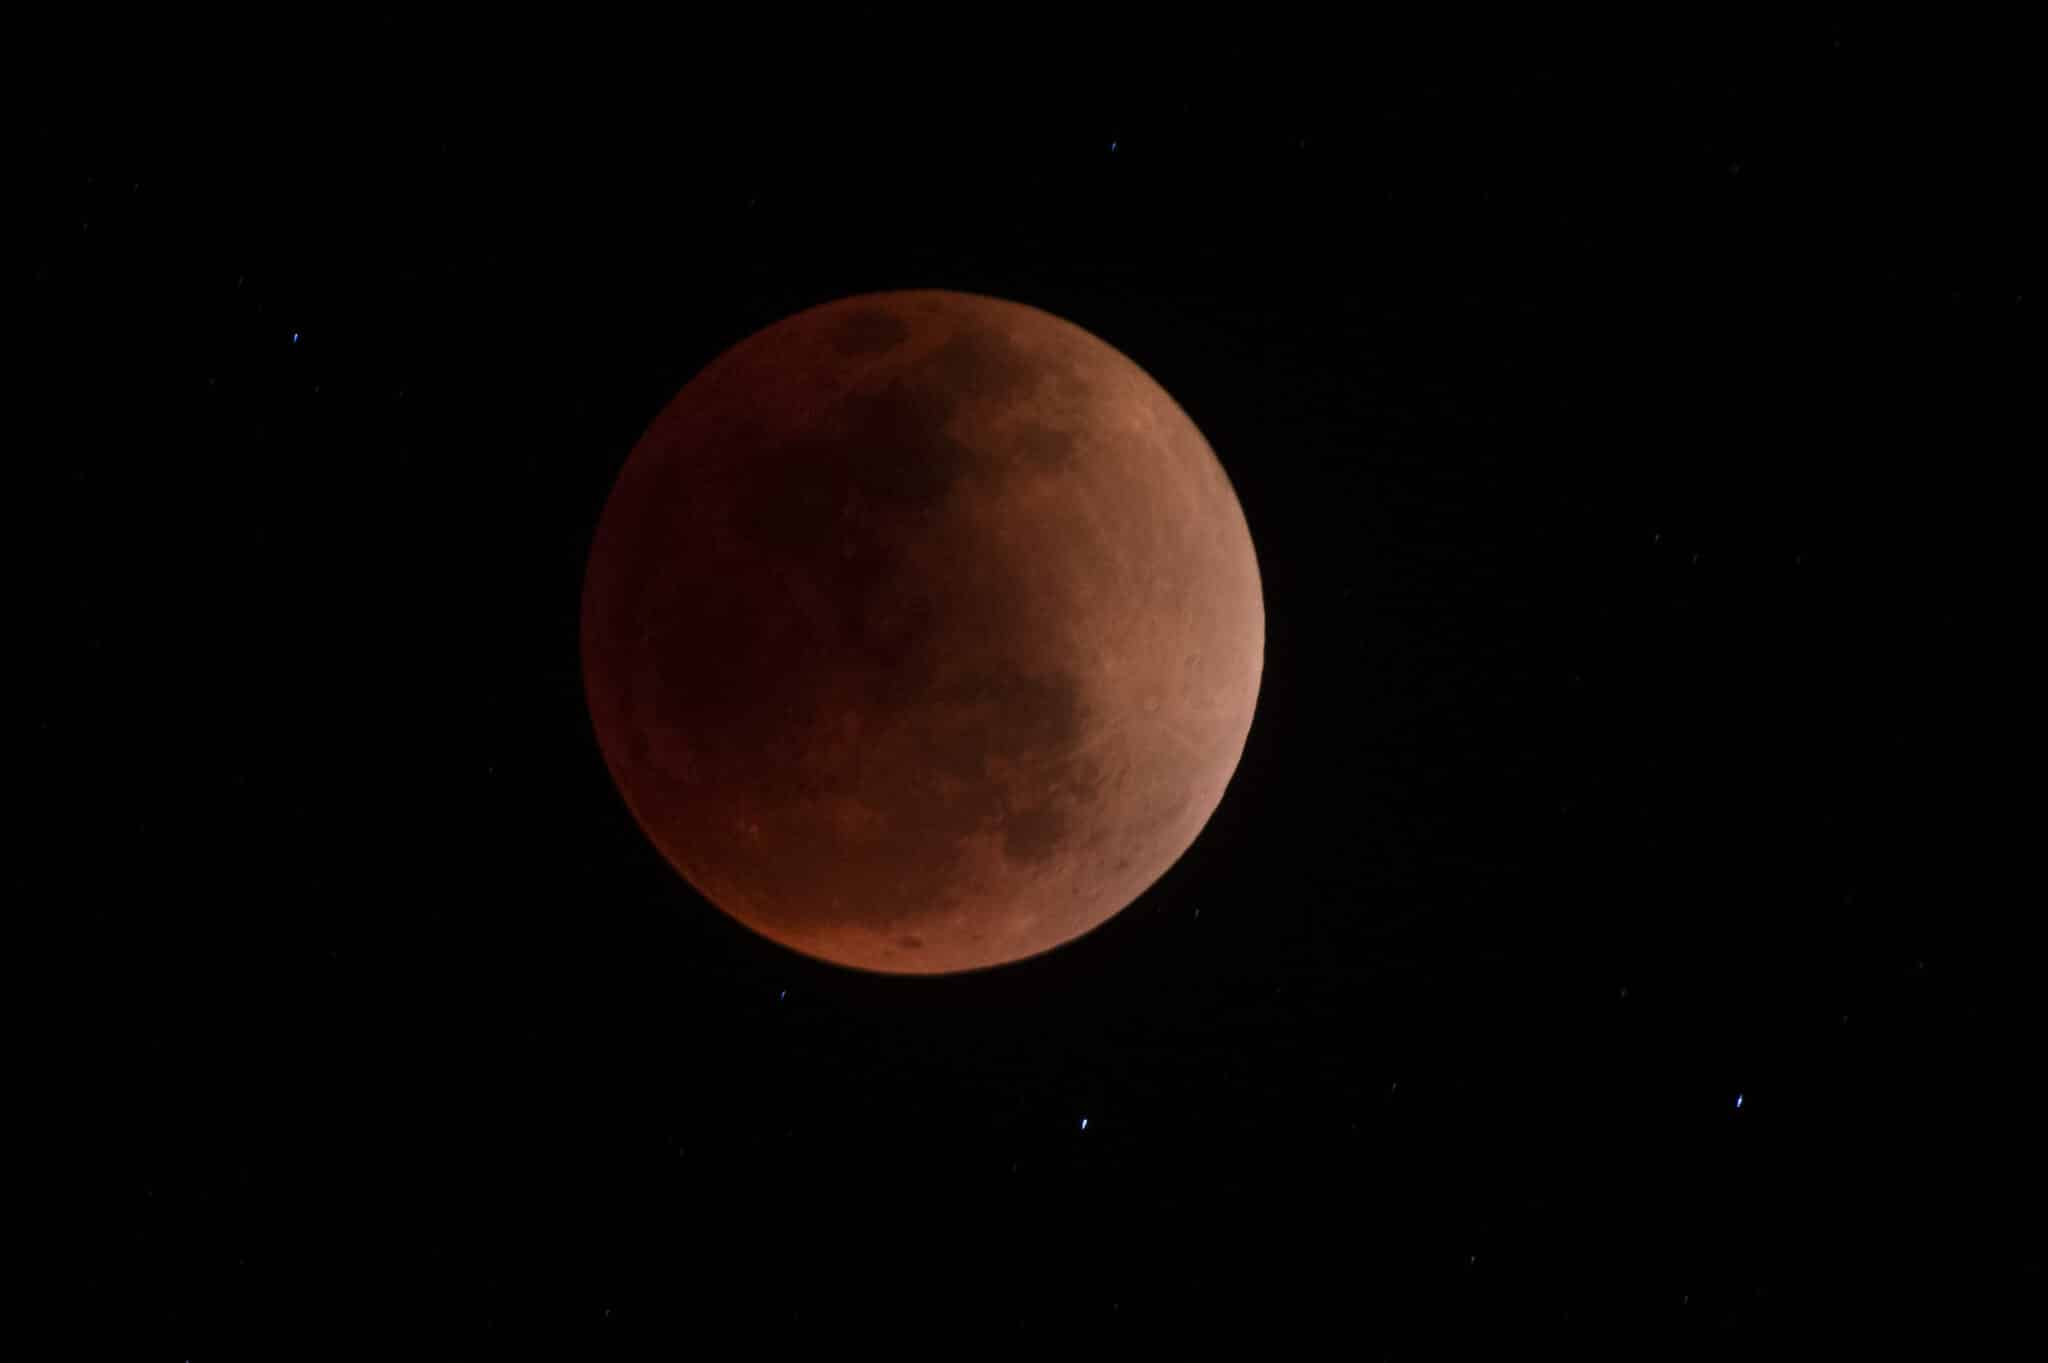 The blood moon is seen during a total lunar eclipse in Canta, east of Lima on May 15, 2022. (Photo by ERNESTO BENAVIDES / AFP) (Photo by ERNESTO BENAVIDES/AFP via Getty Images)